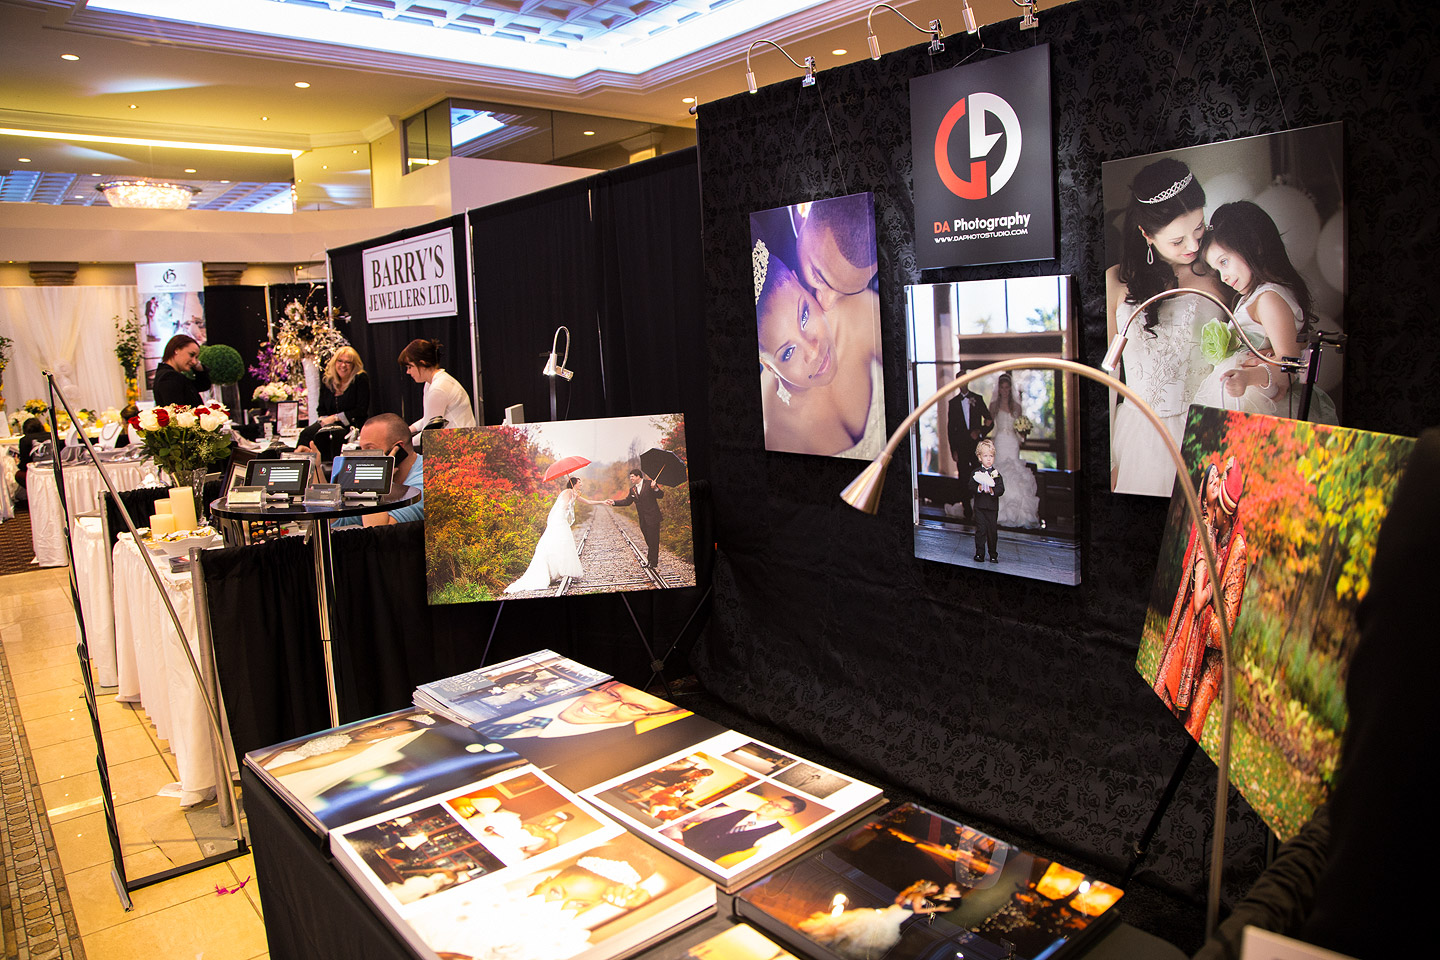 Bridal Booth Photographer Set up by DA Photography - Bridal Show products